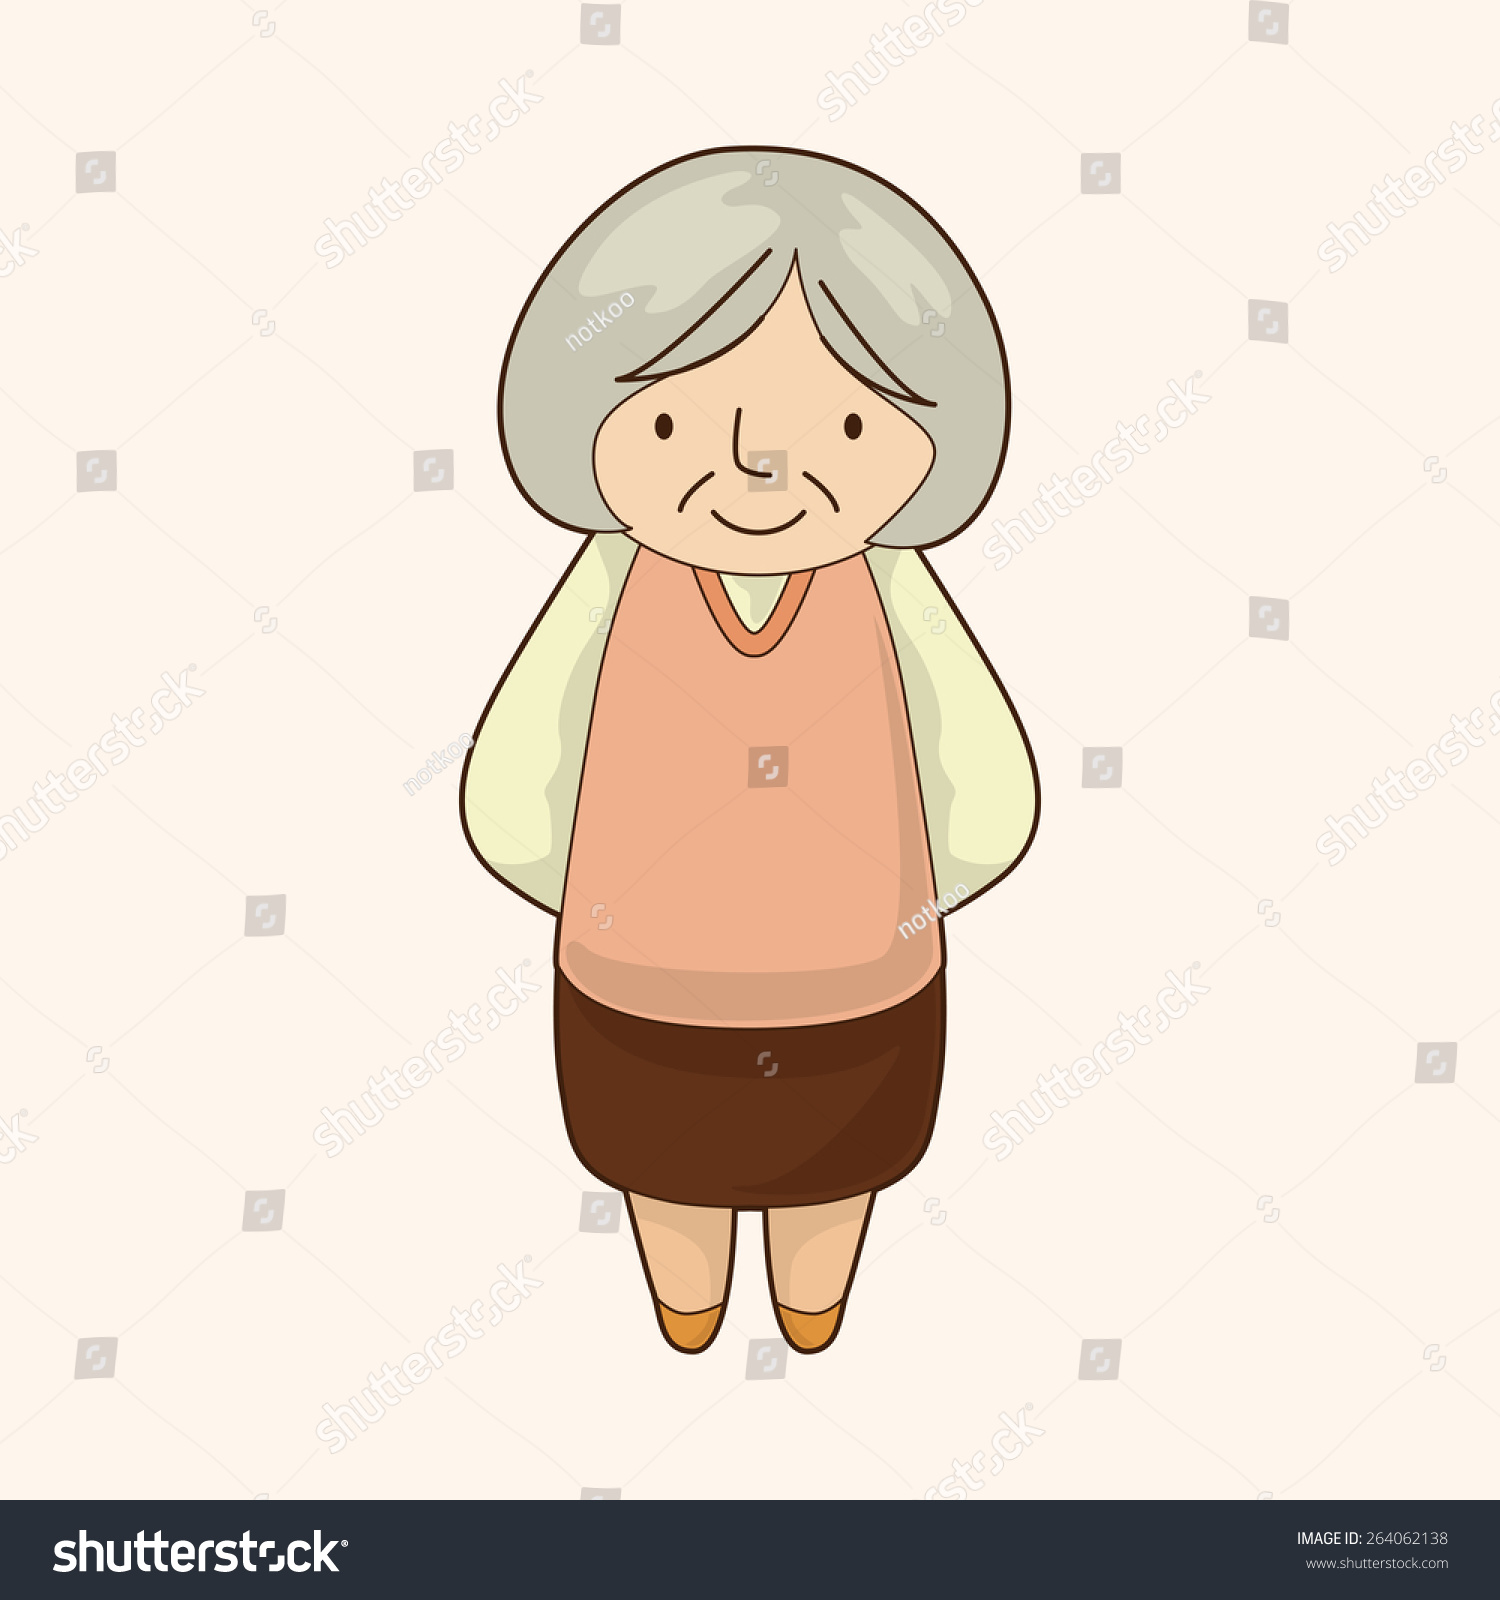 Family Grandmother Character Theme Elements Stock Photo 264062138 ...